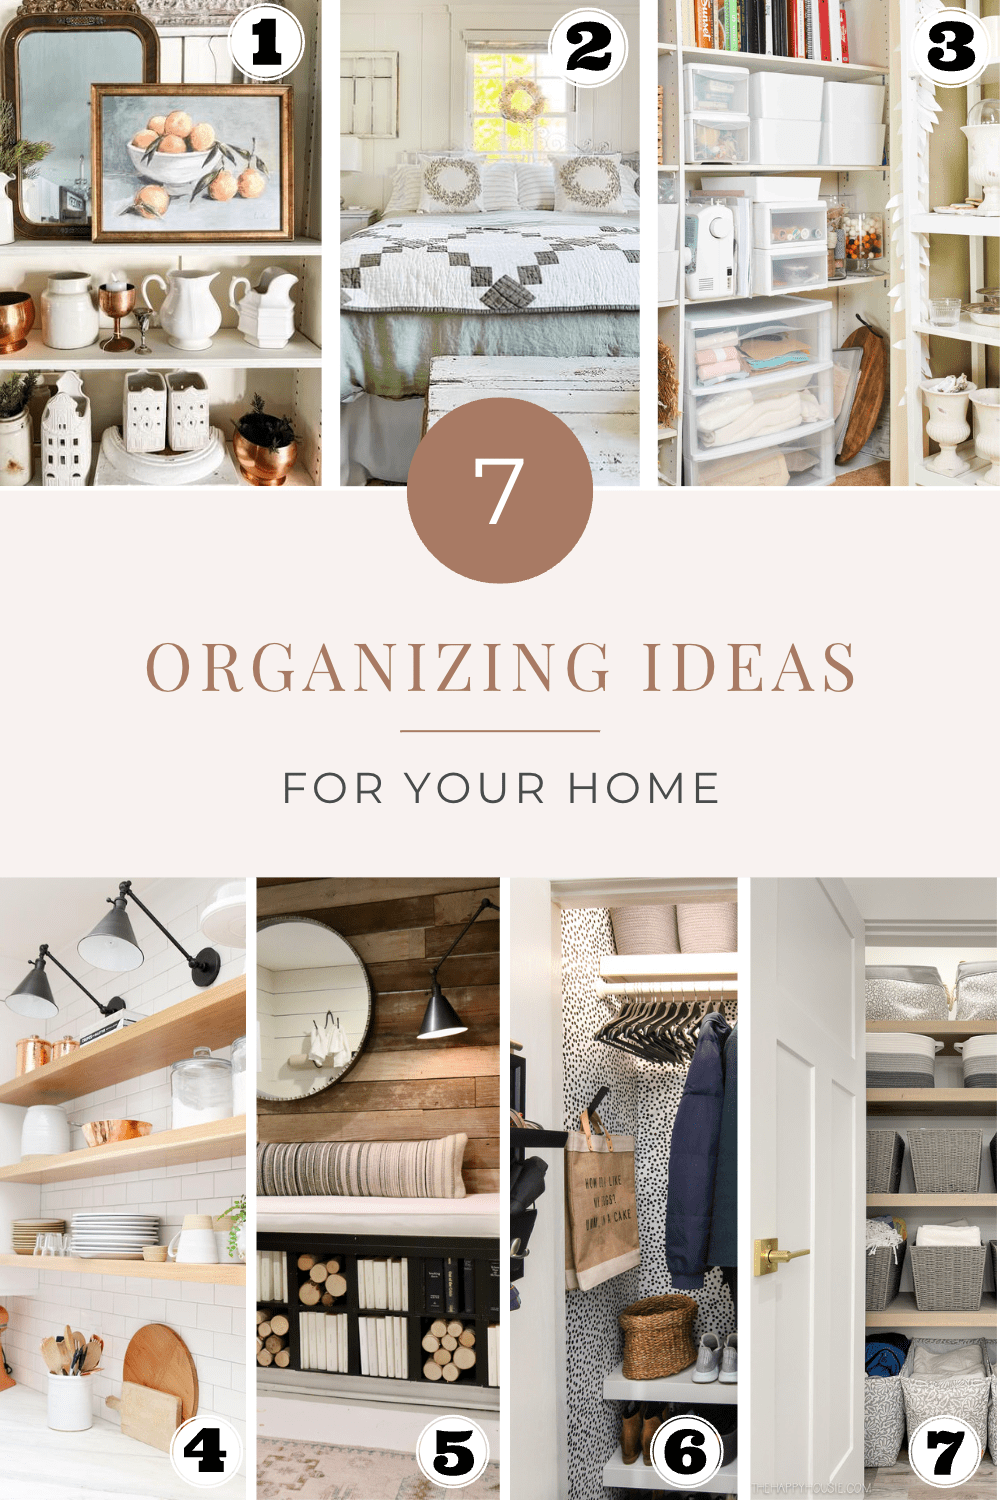 Pin on Home - Home Organization